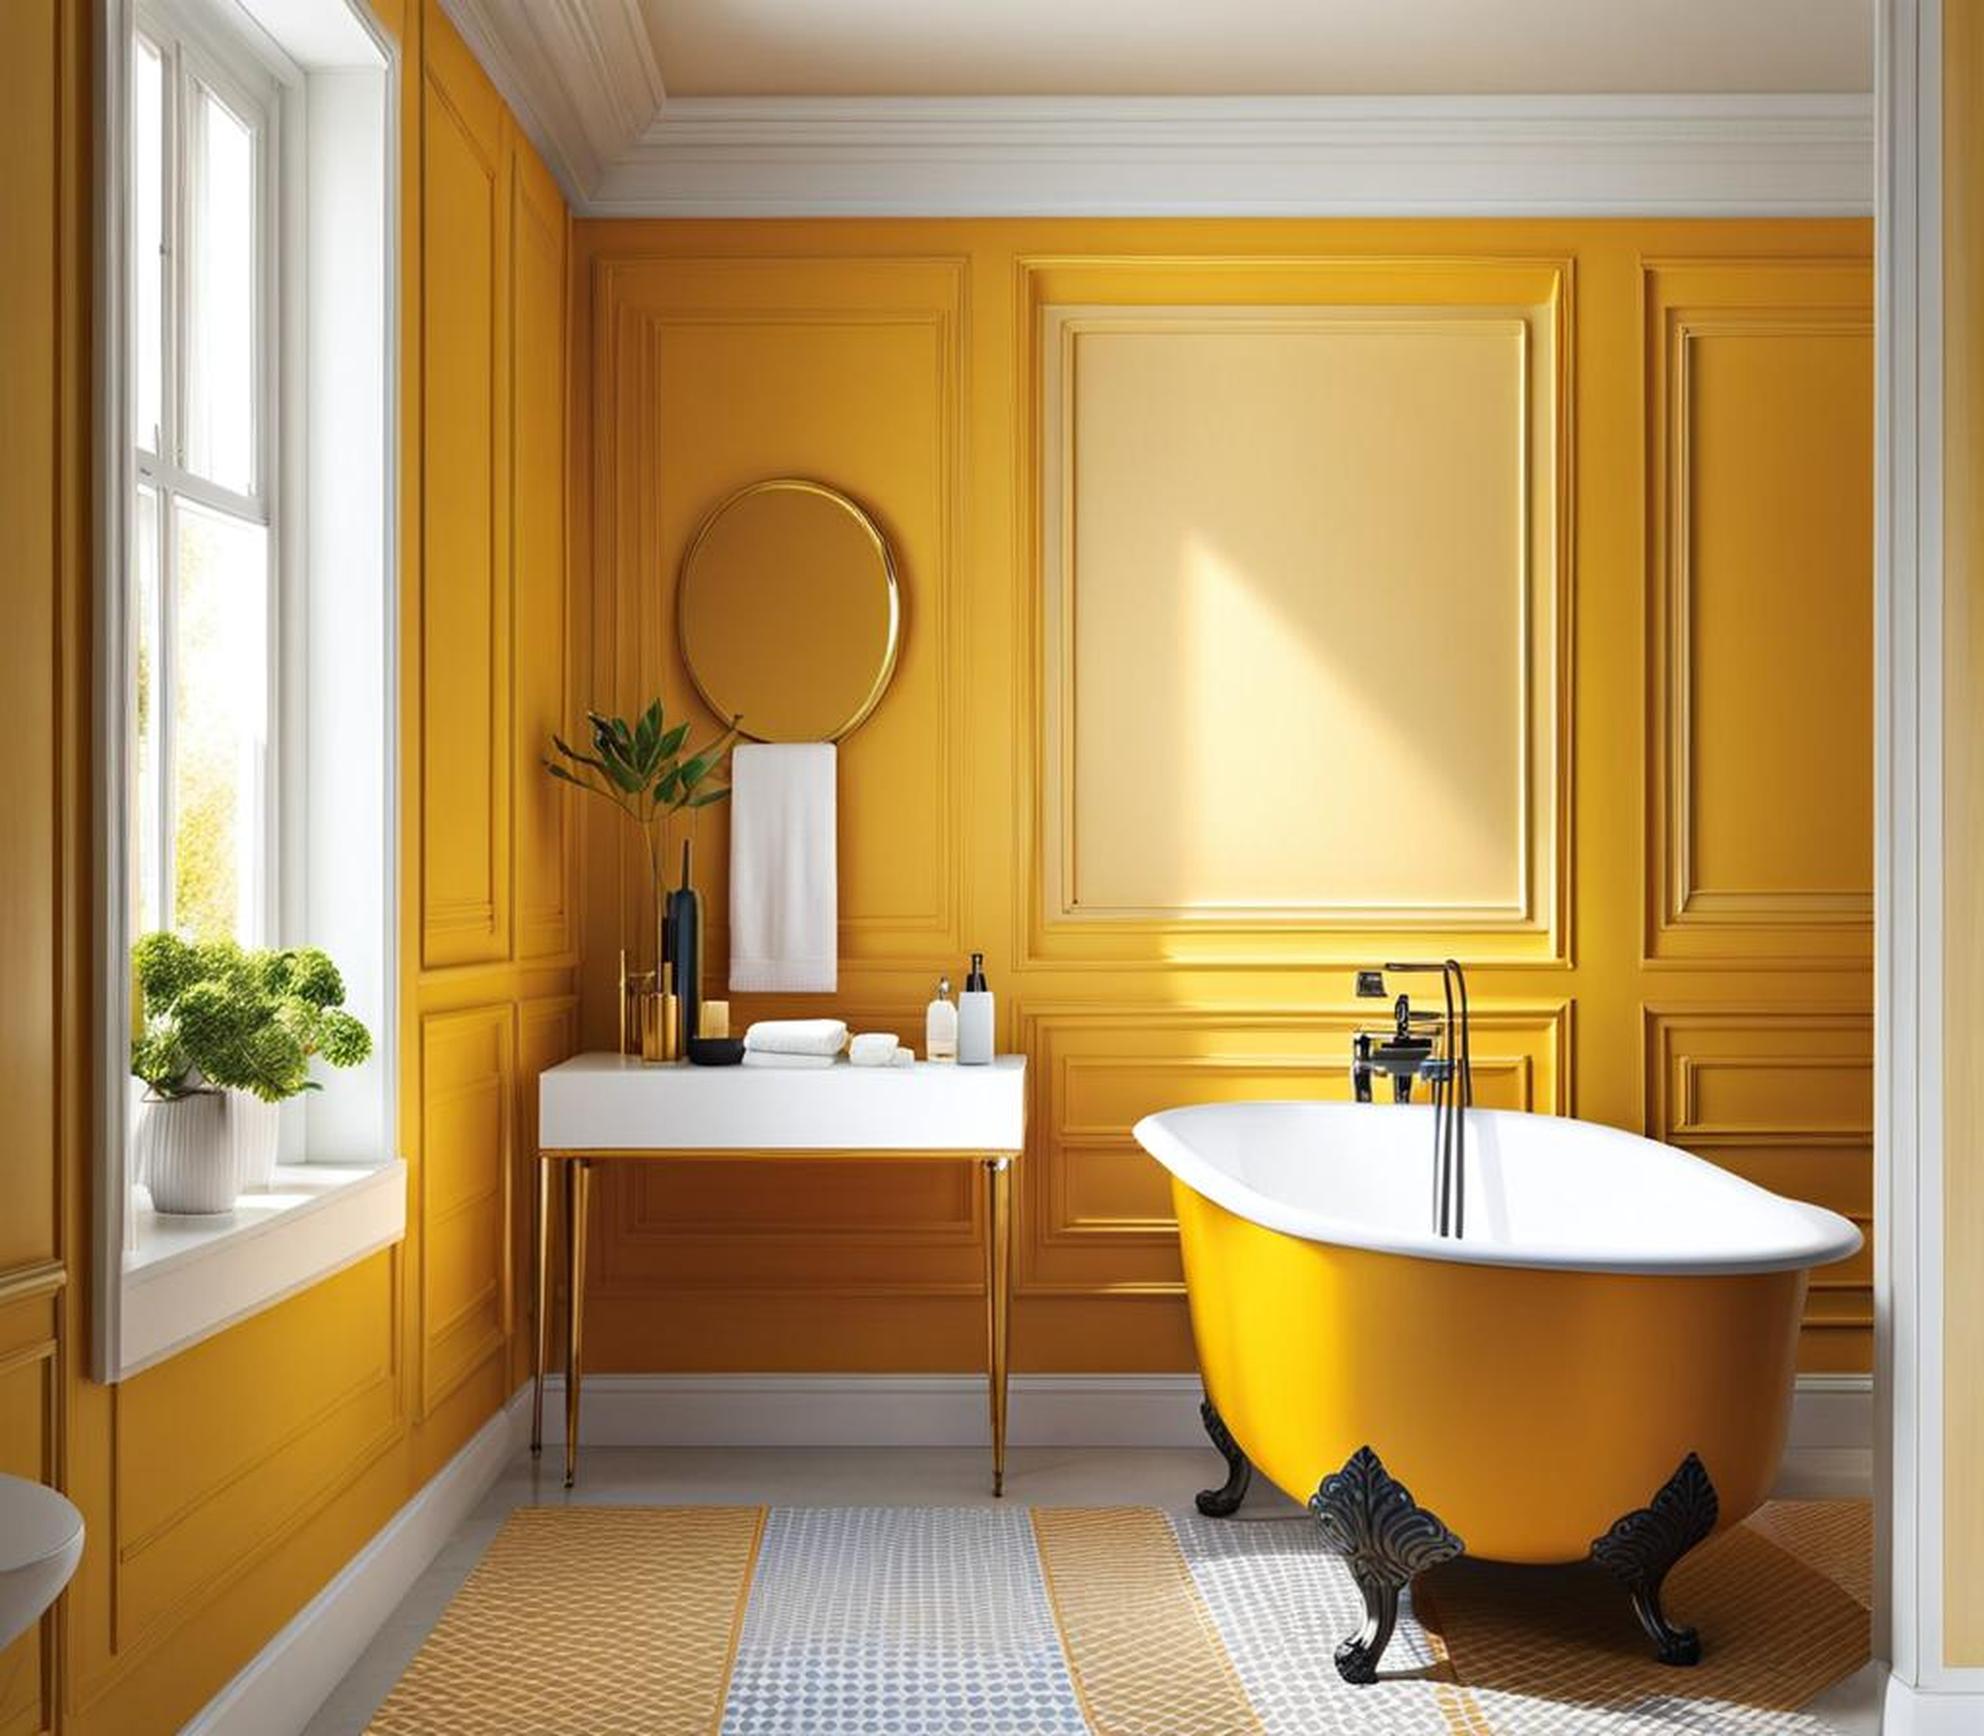 How to Pick Durable and Stylish Bathroom Paint Finishes